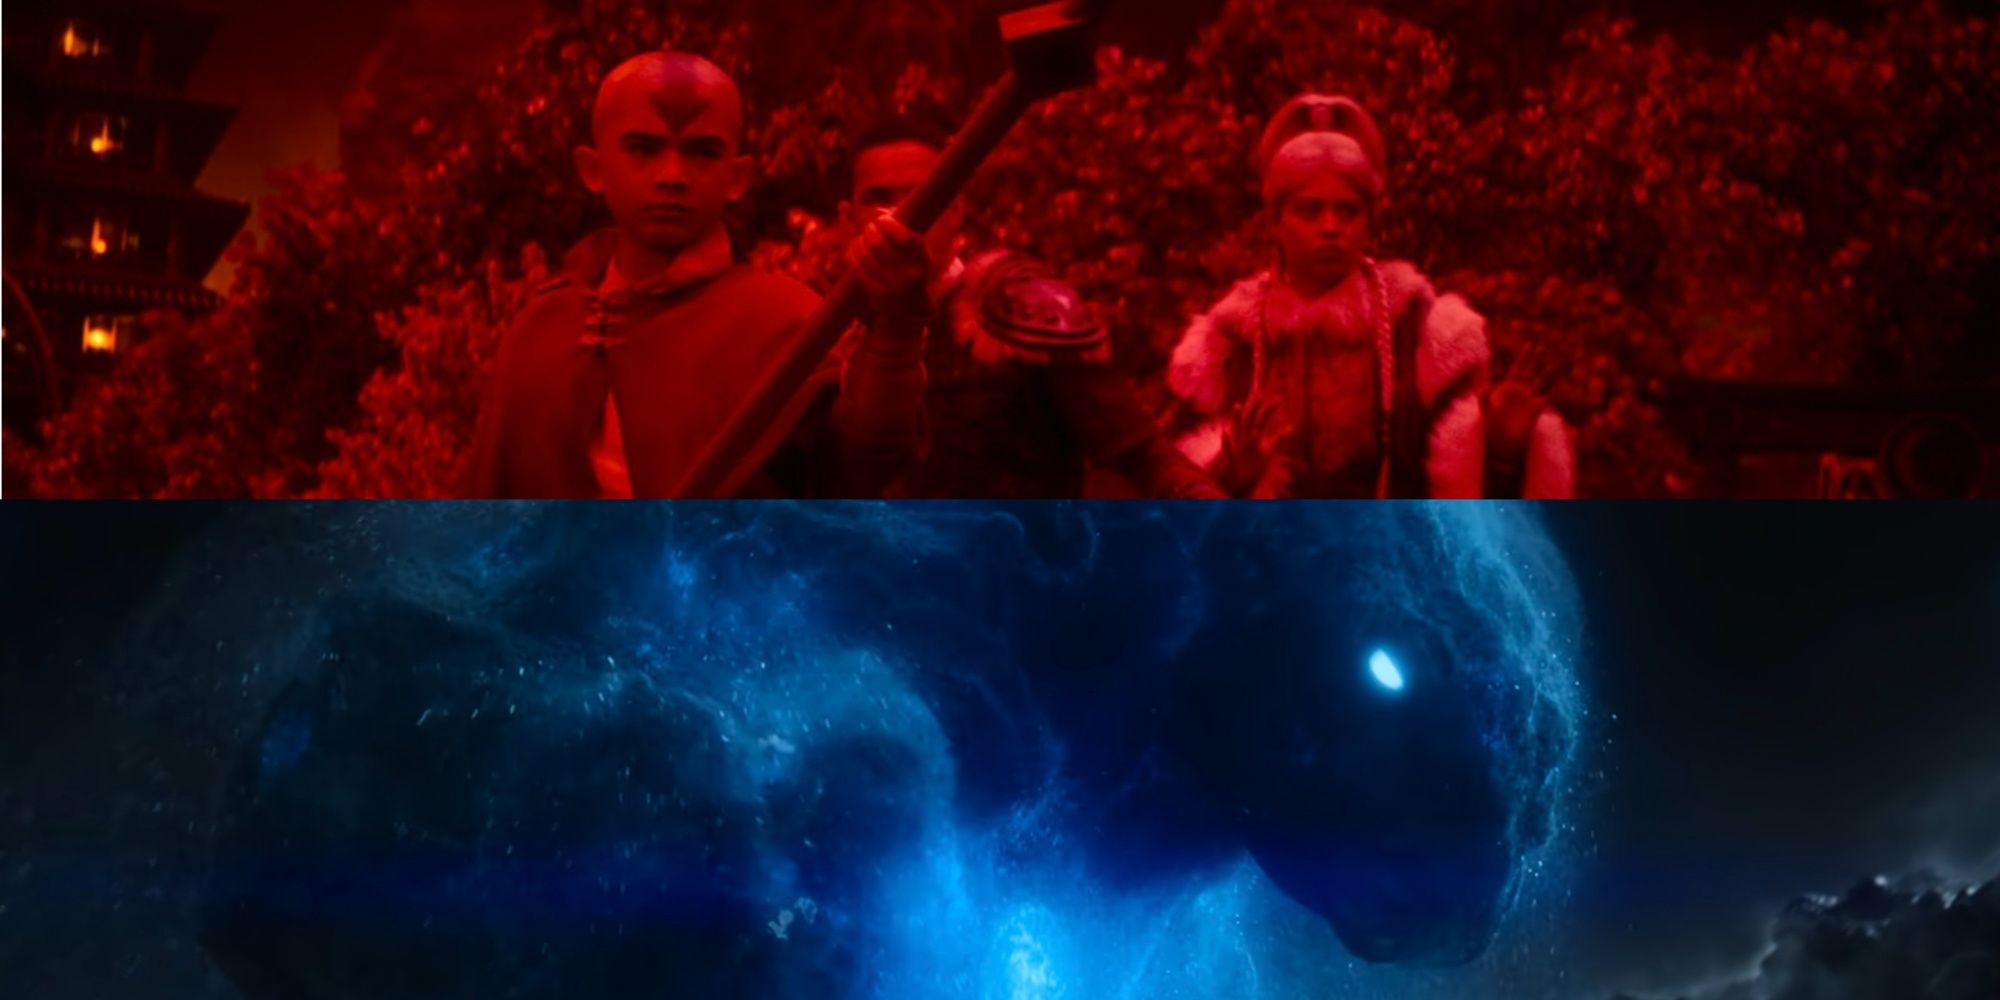 A red image from Avatar: The Last Airbender on top of a blue image of a water spirit